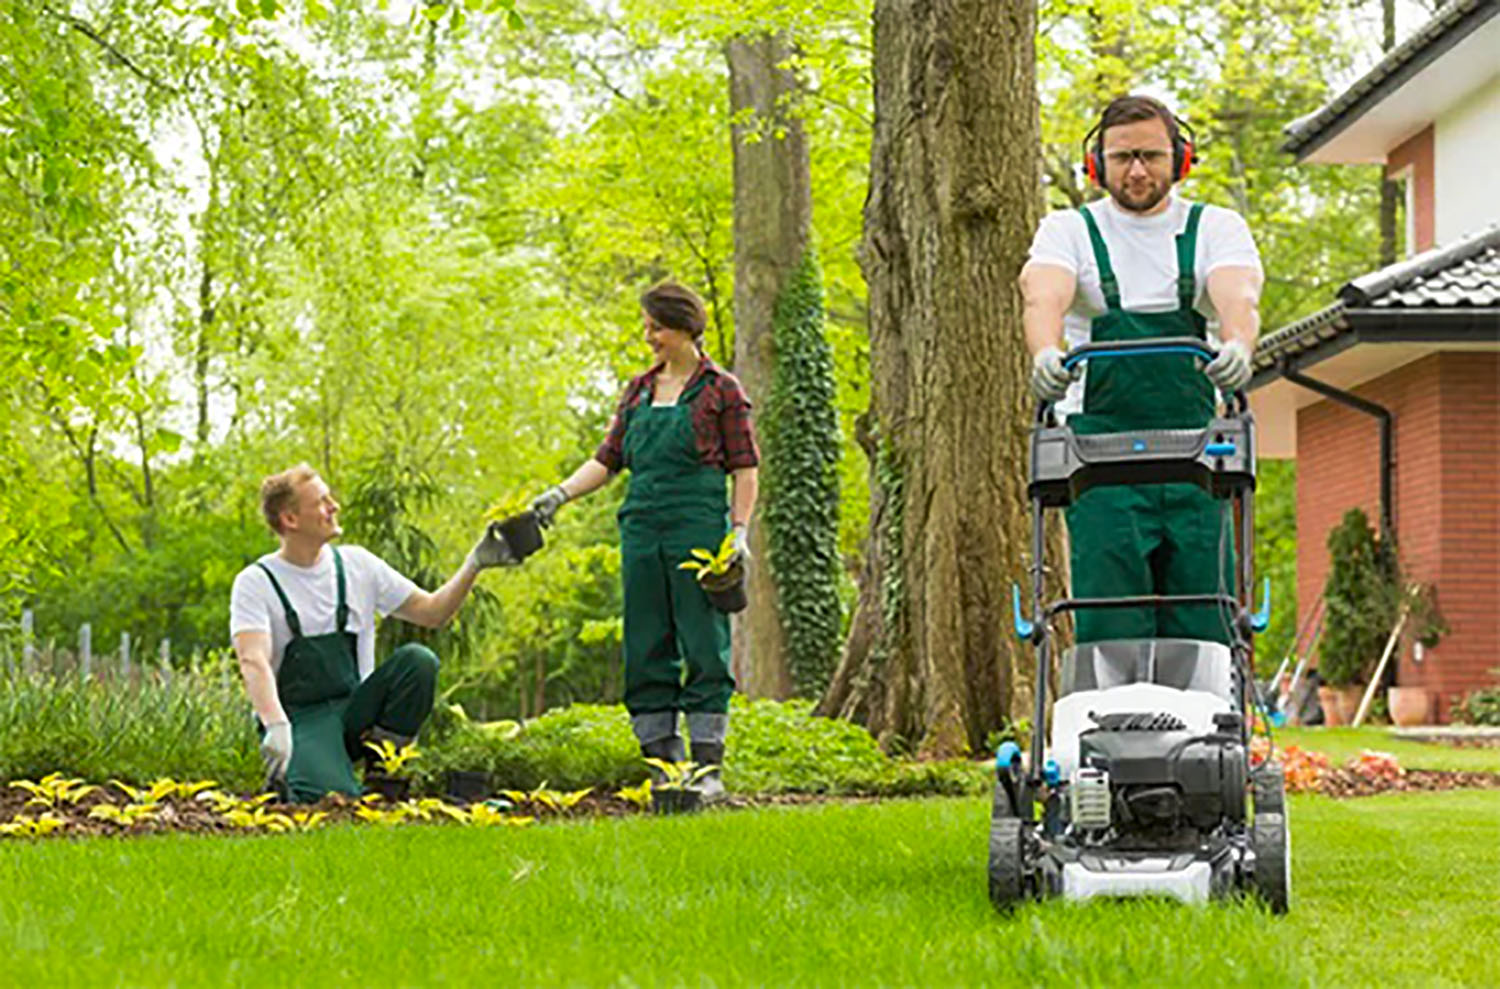 Groundskeeper Jobs in USA with Visa Sponsorship